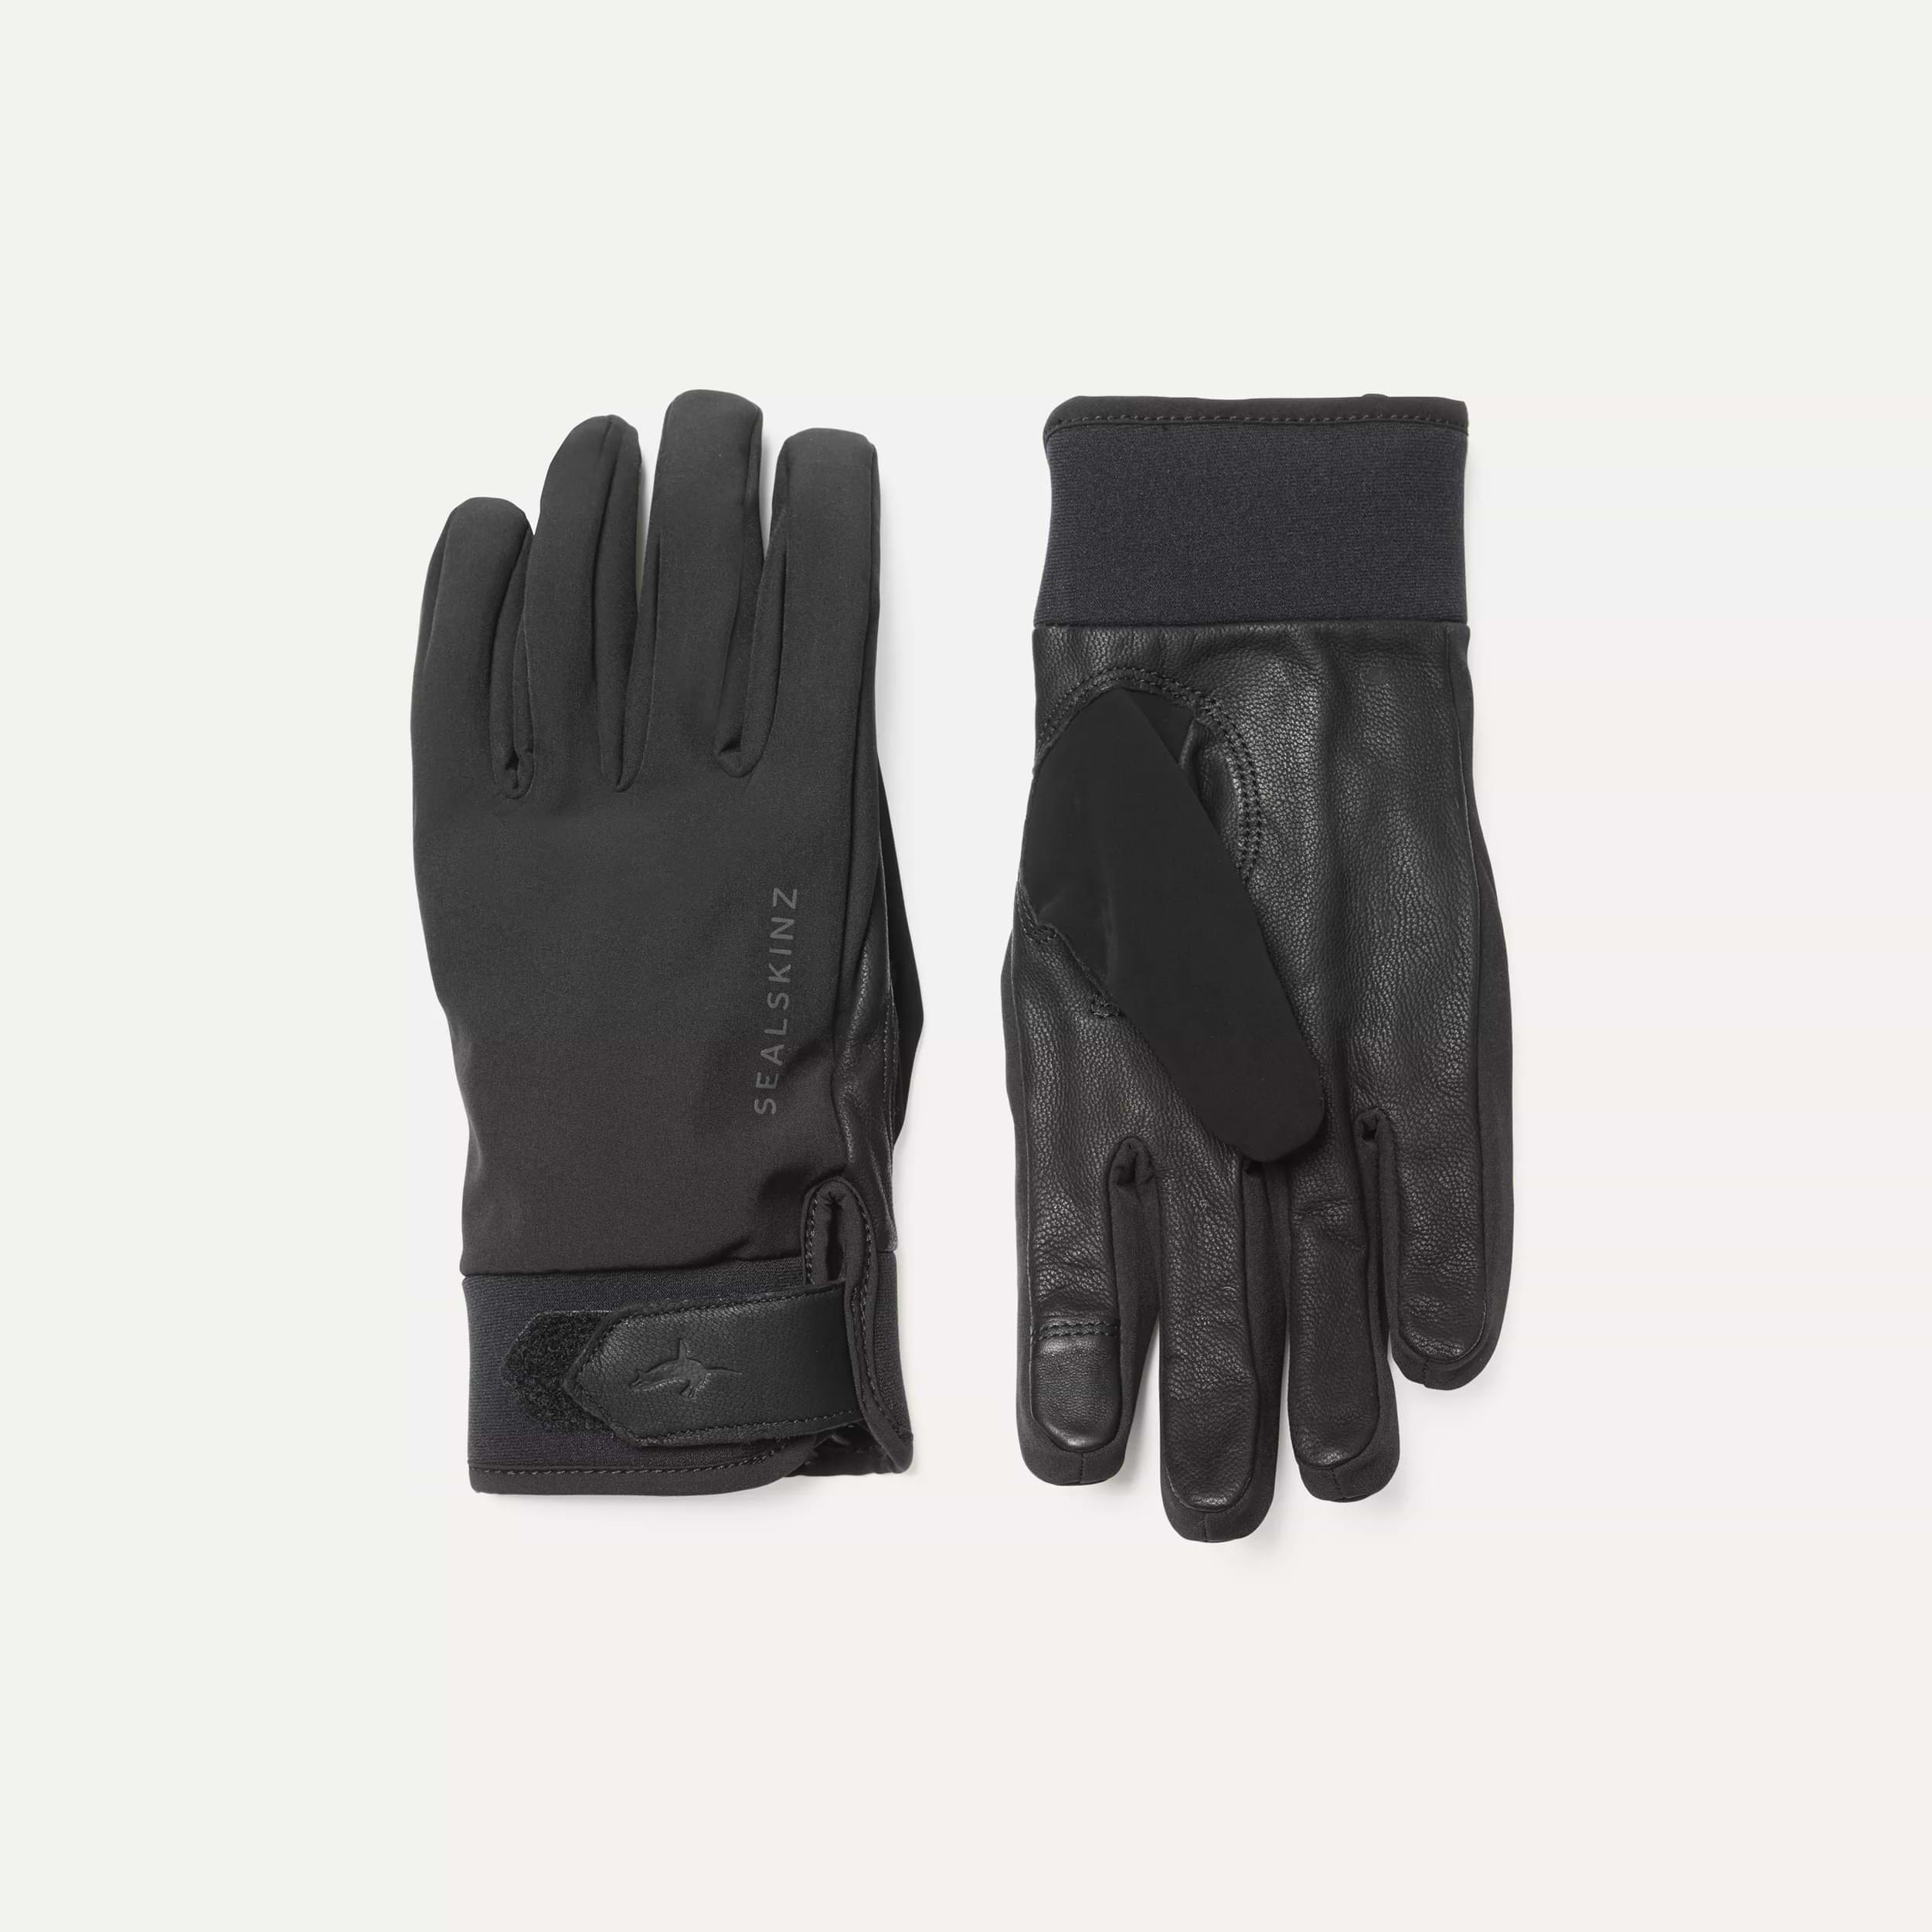 Rowing Gloves - yes or no? - Faster Masters Rowing™